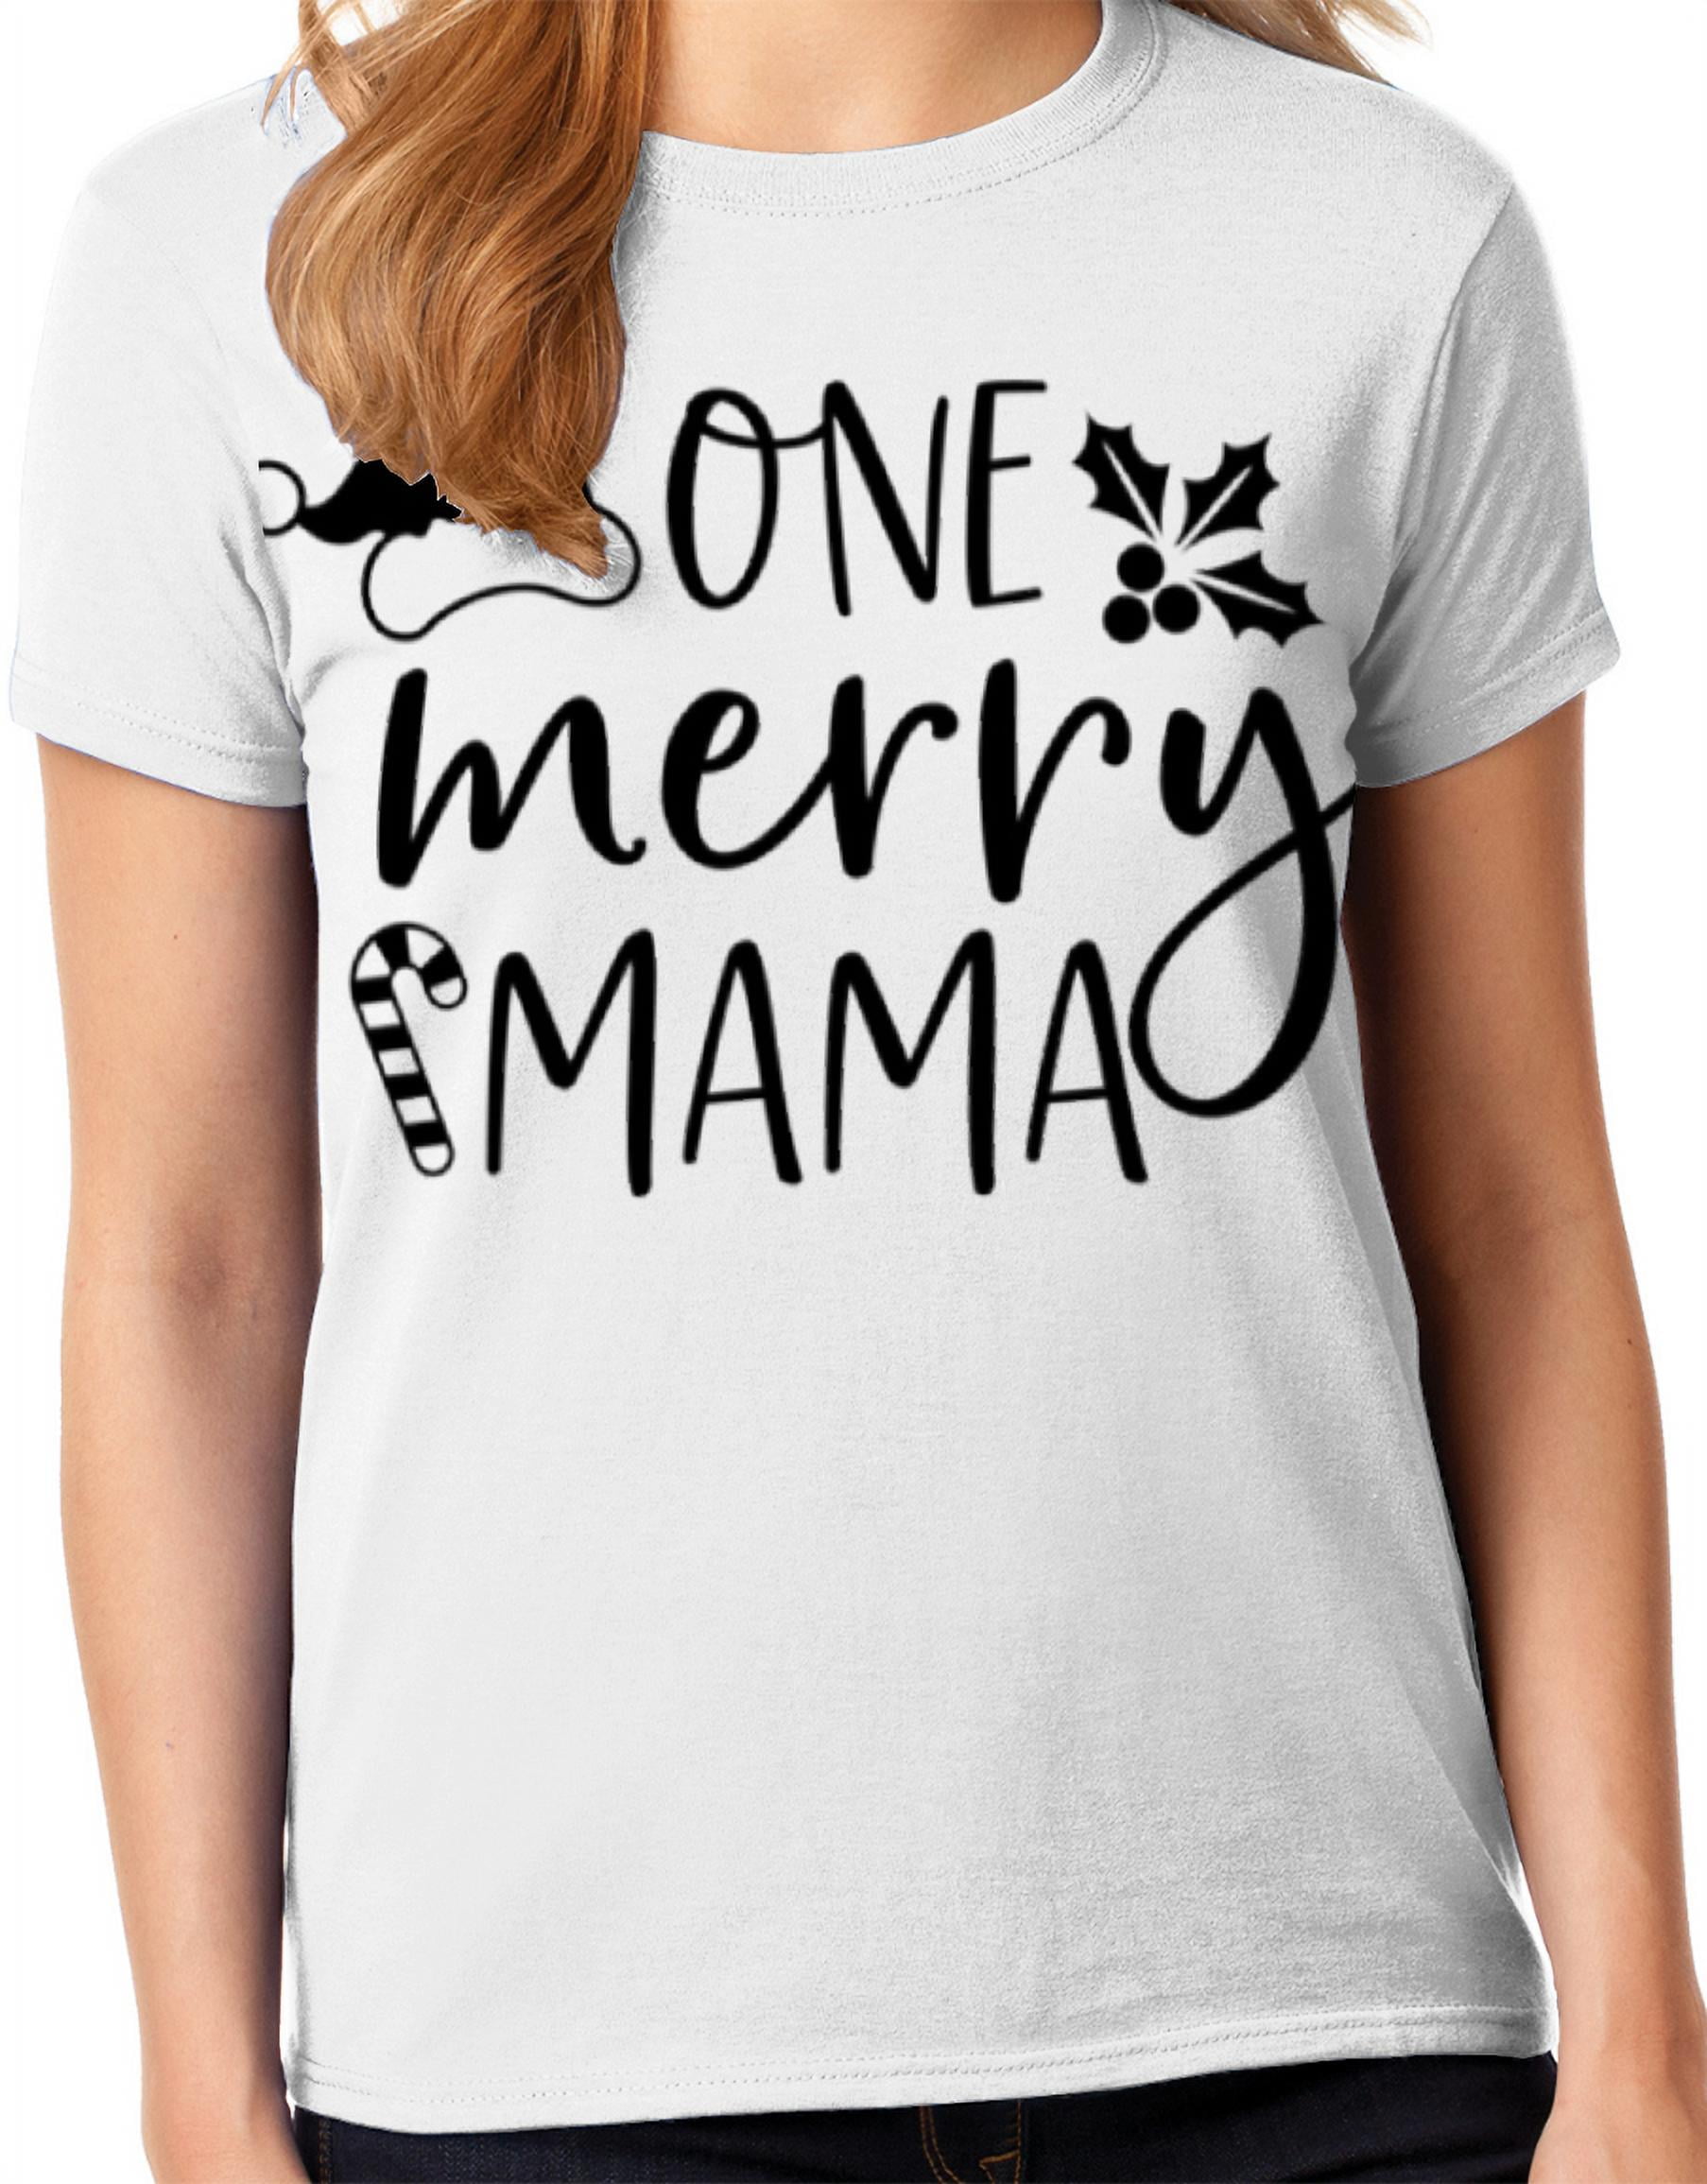 One hot mama, gift for her, gift for mom, mother's day graphic t-shirt